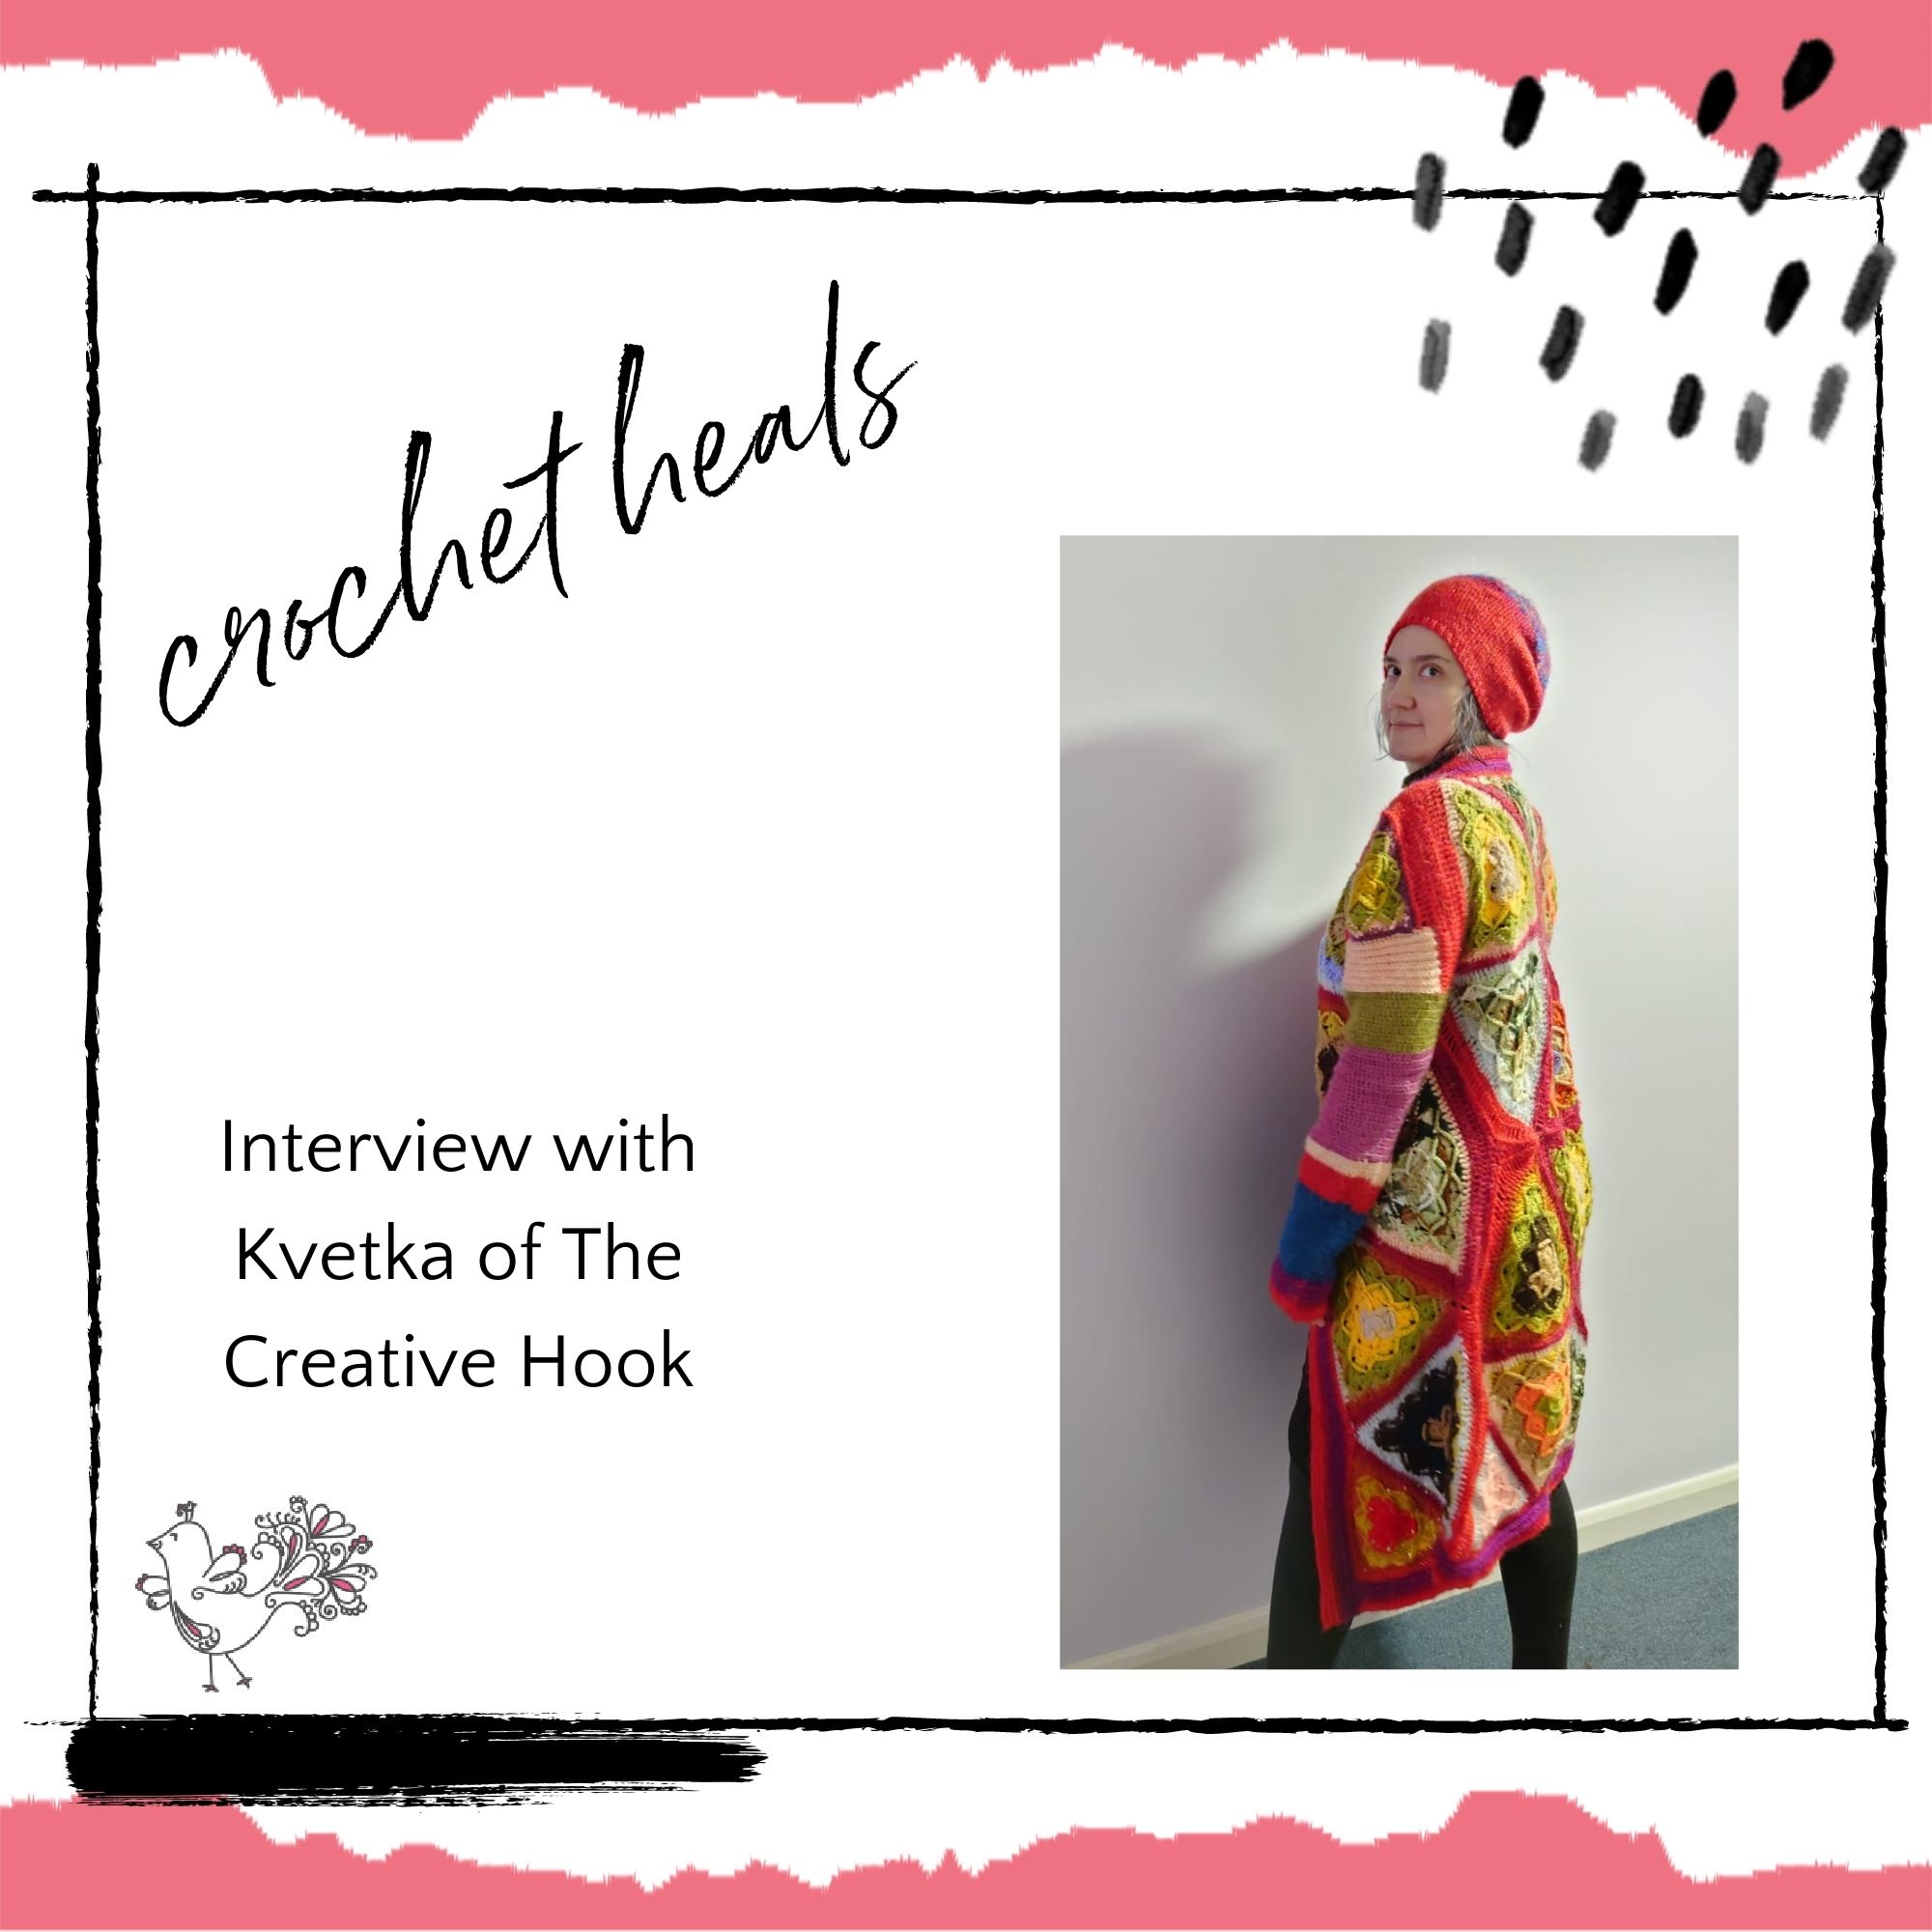 crochet heals interview with kvetka